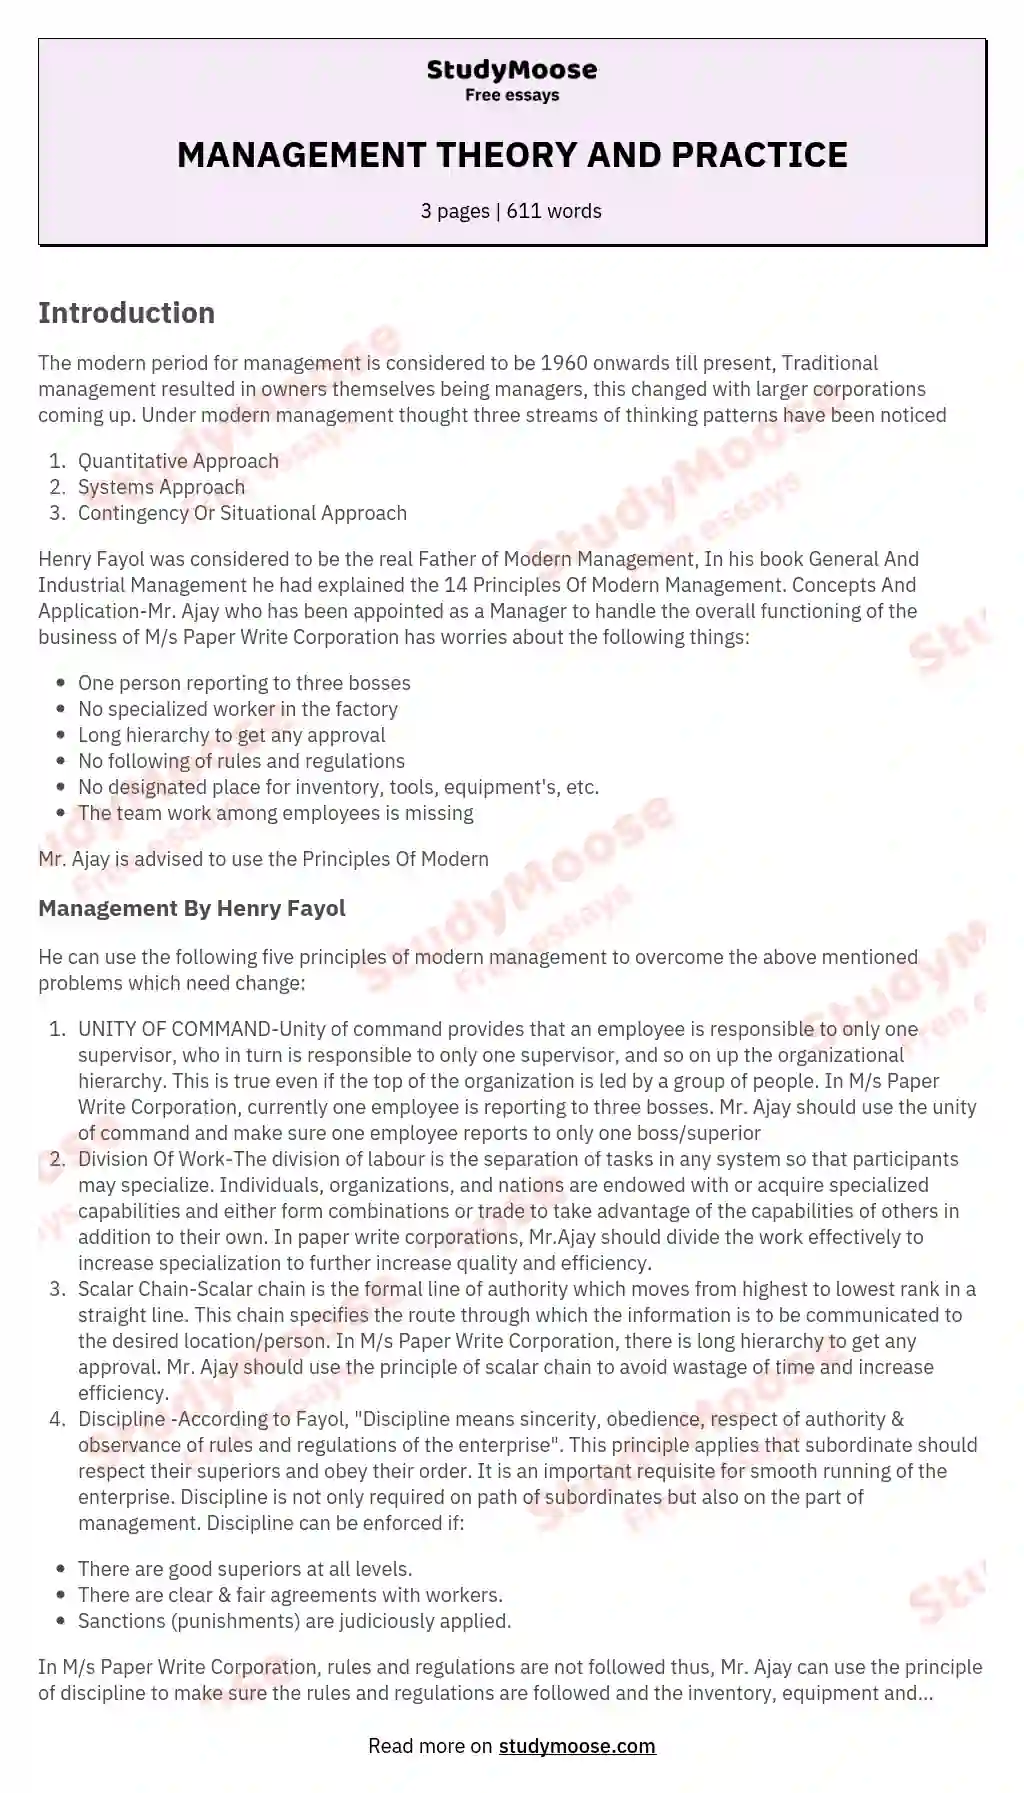 MANAGEMENT THEORY AND PRACTICE essay